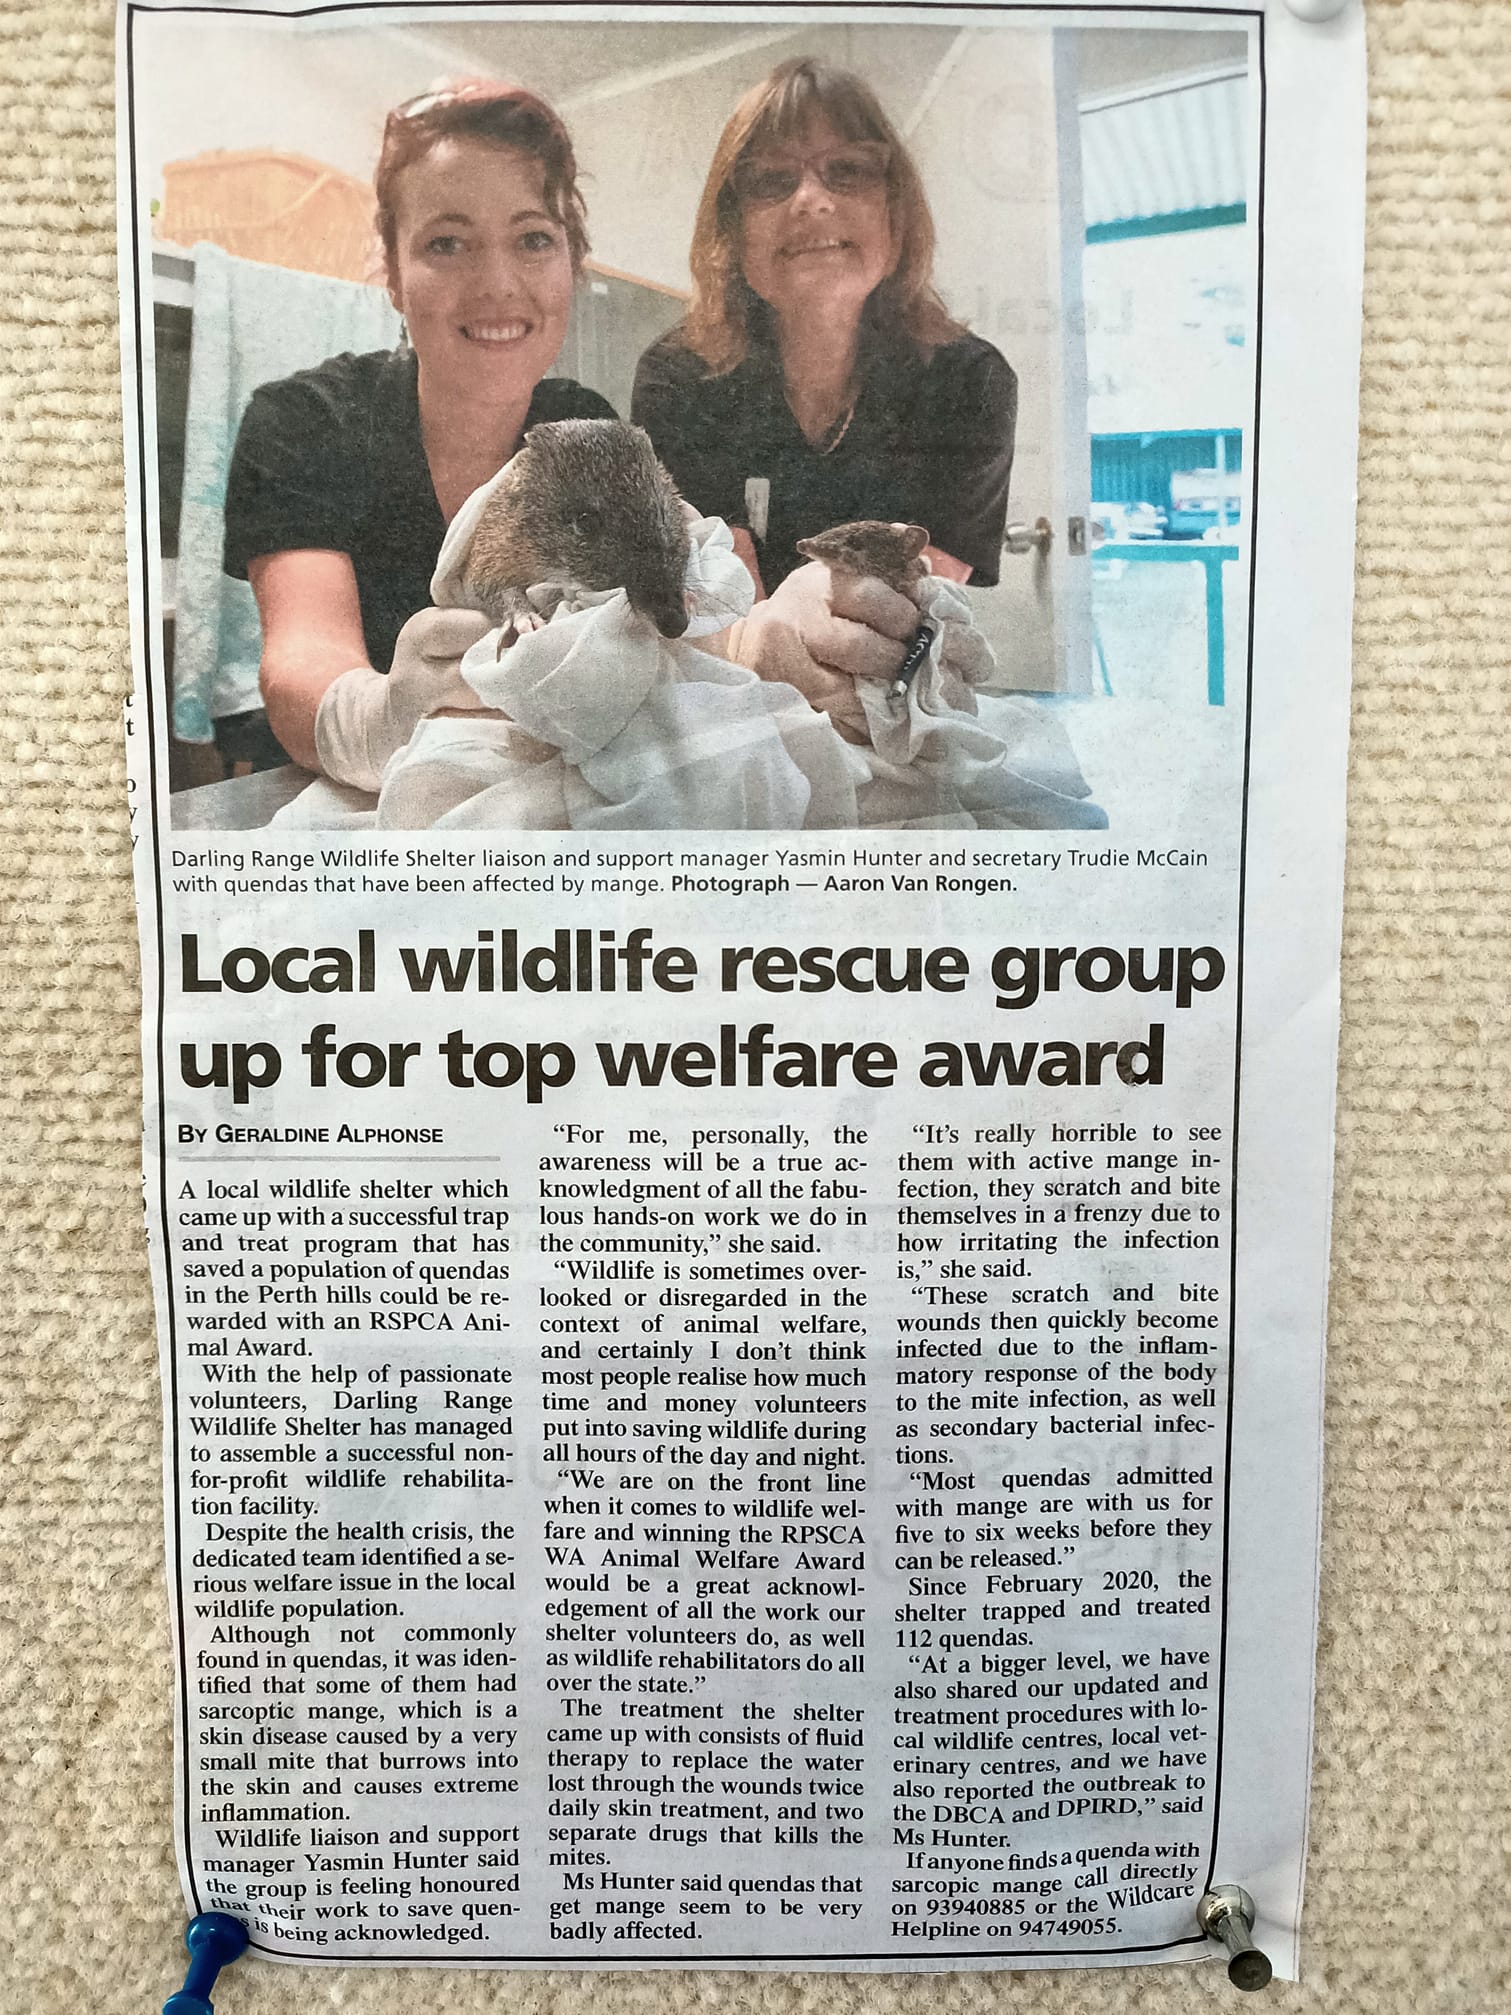 We were awarded a RSPCA Award for our work with Quenda!